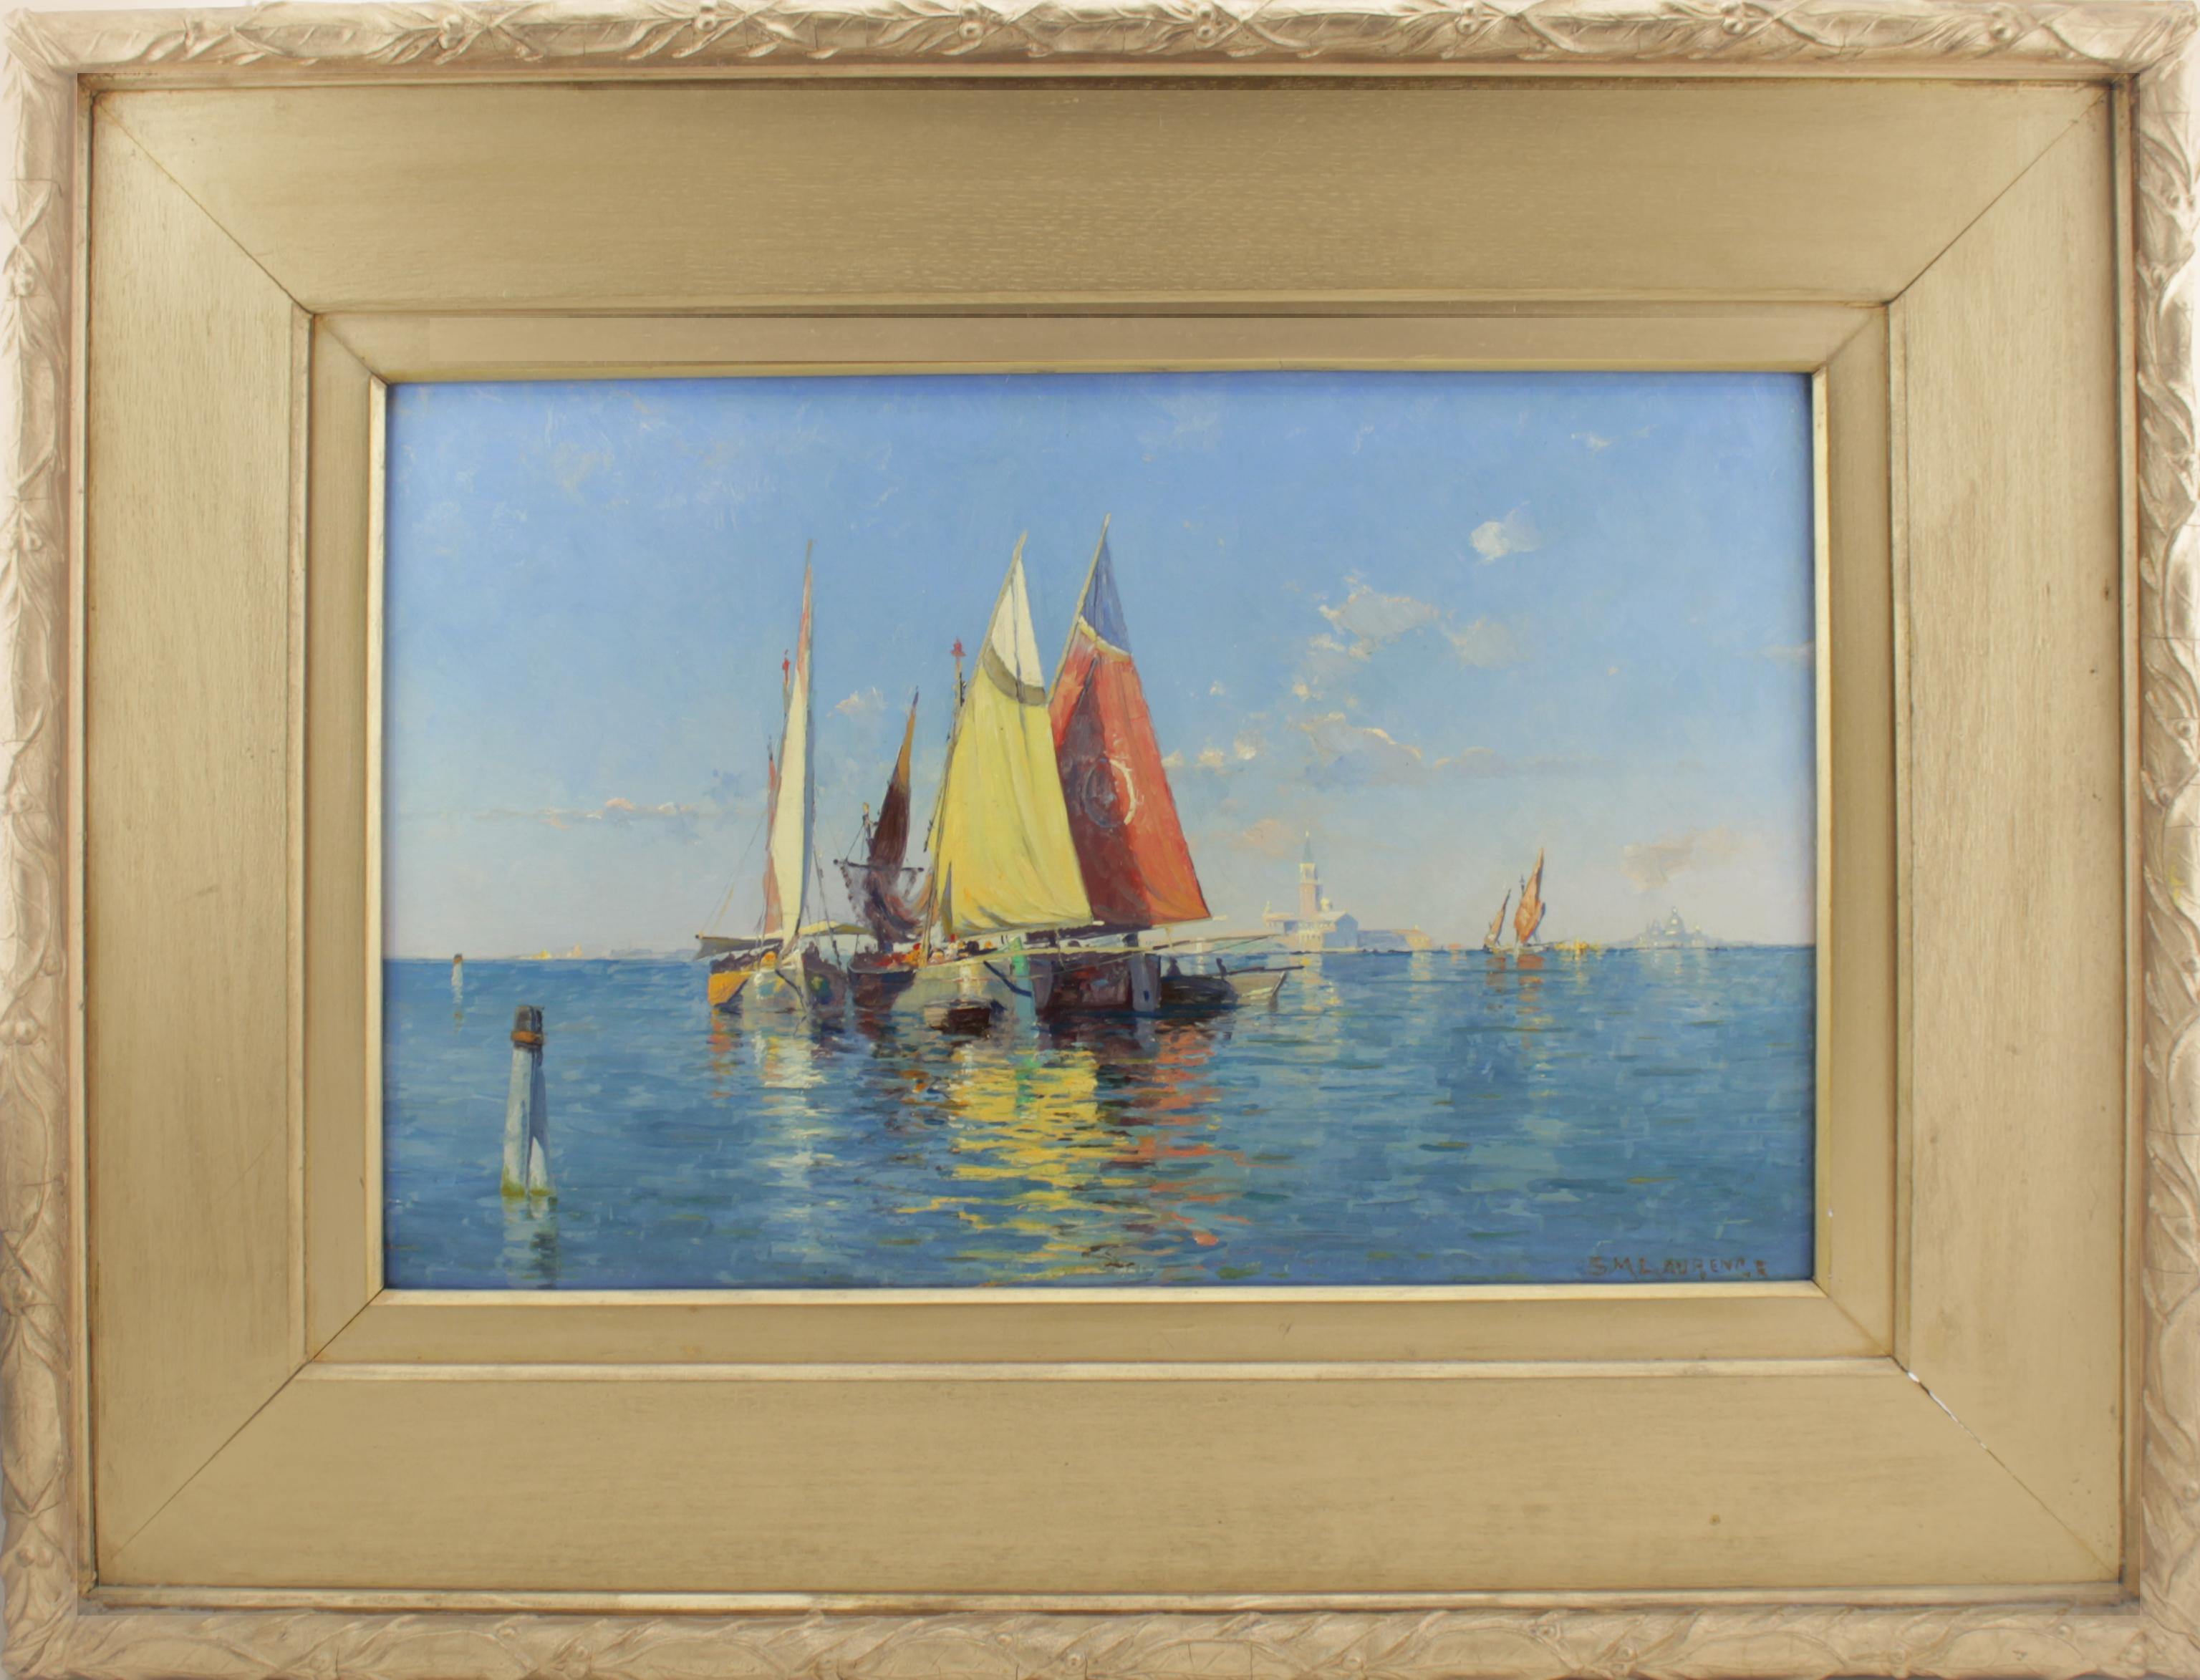 Off San Giorgio Maggiore, Venice - Painting by Sydney Mortimer Laurence